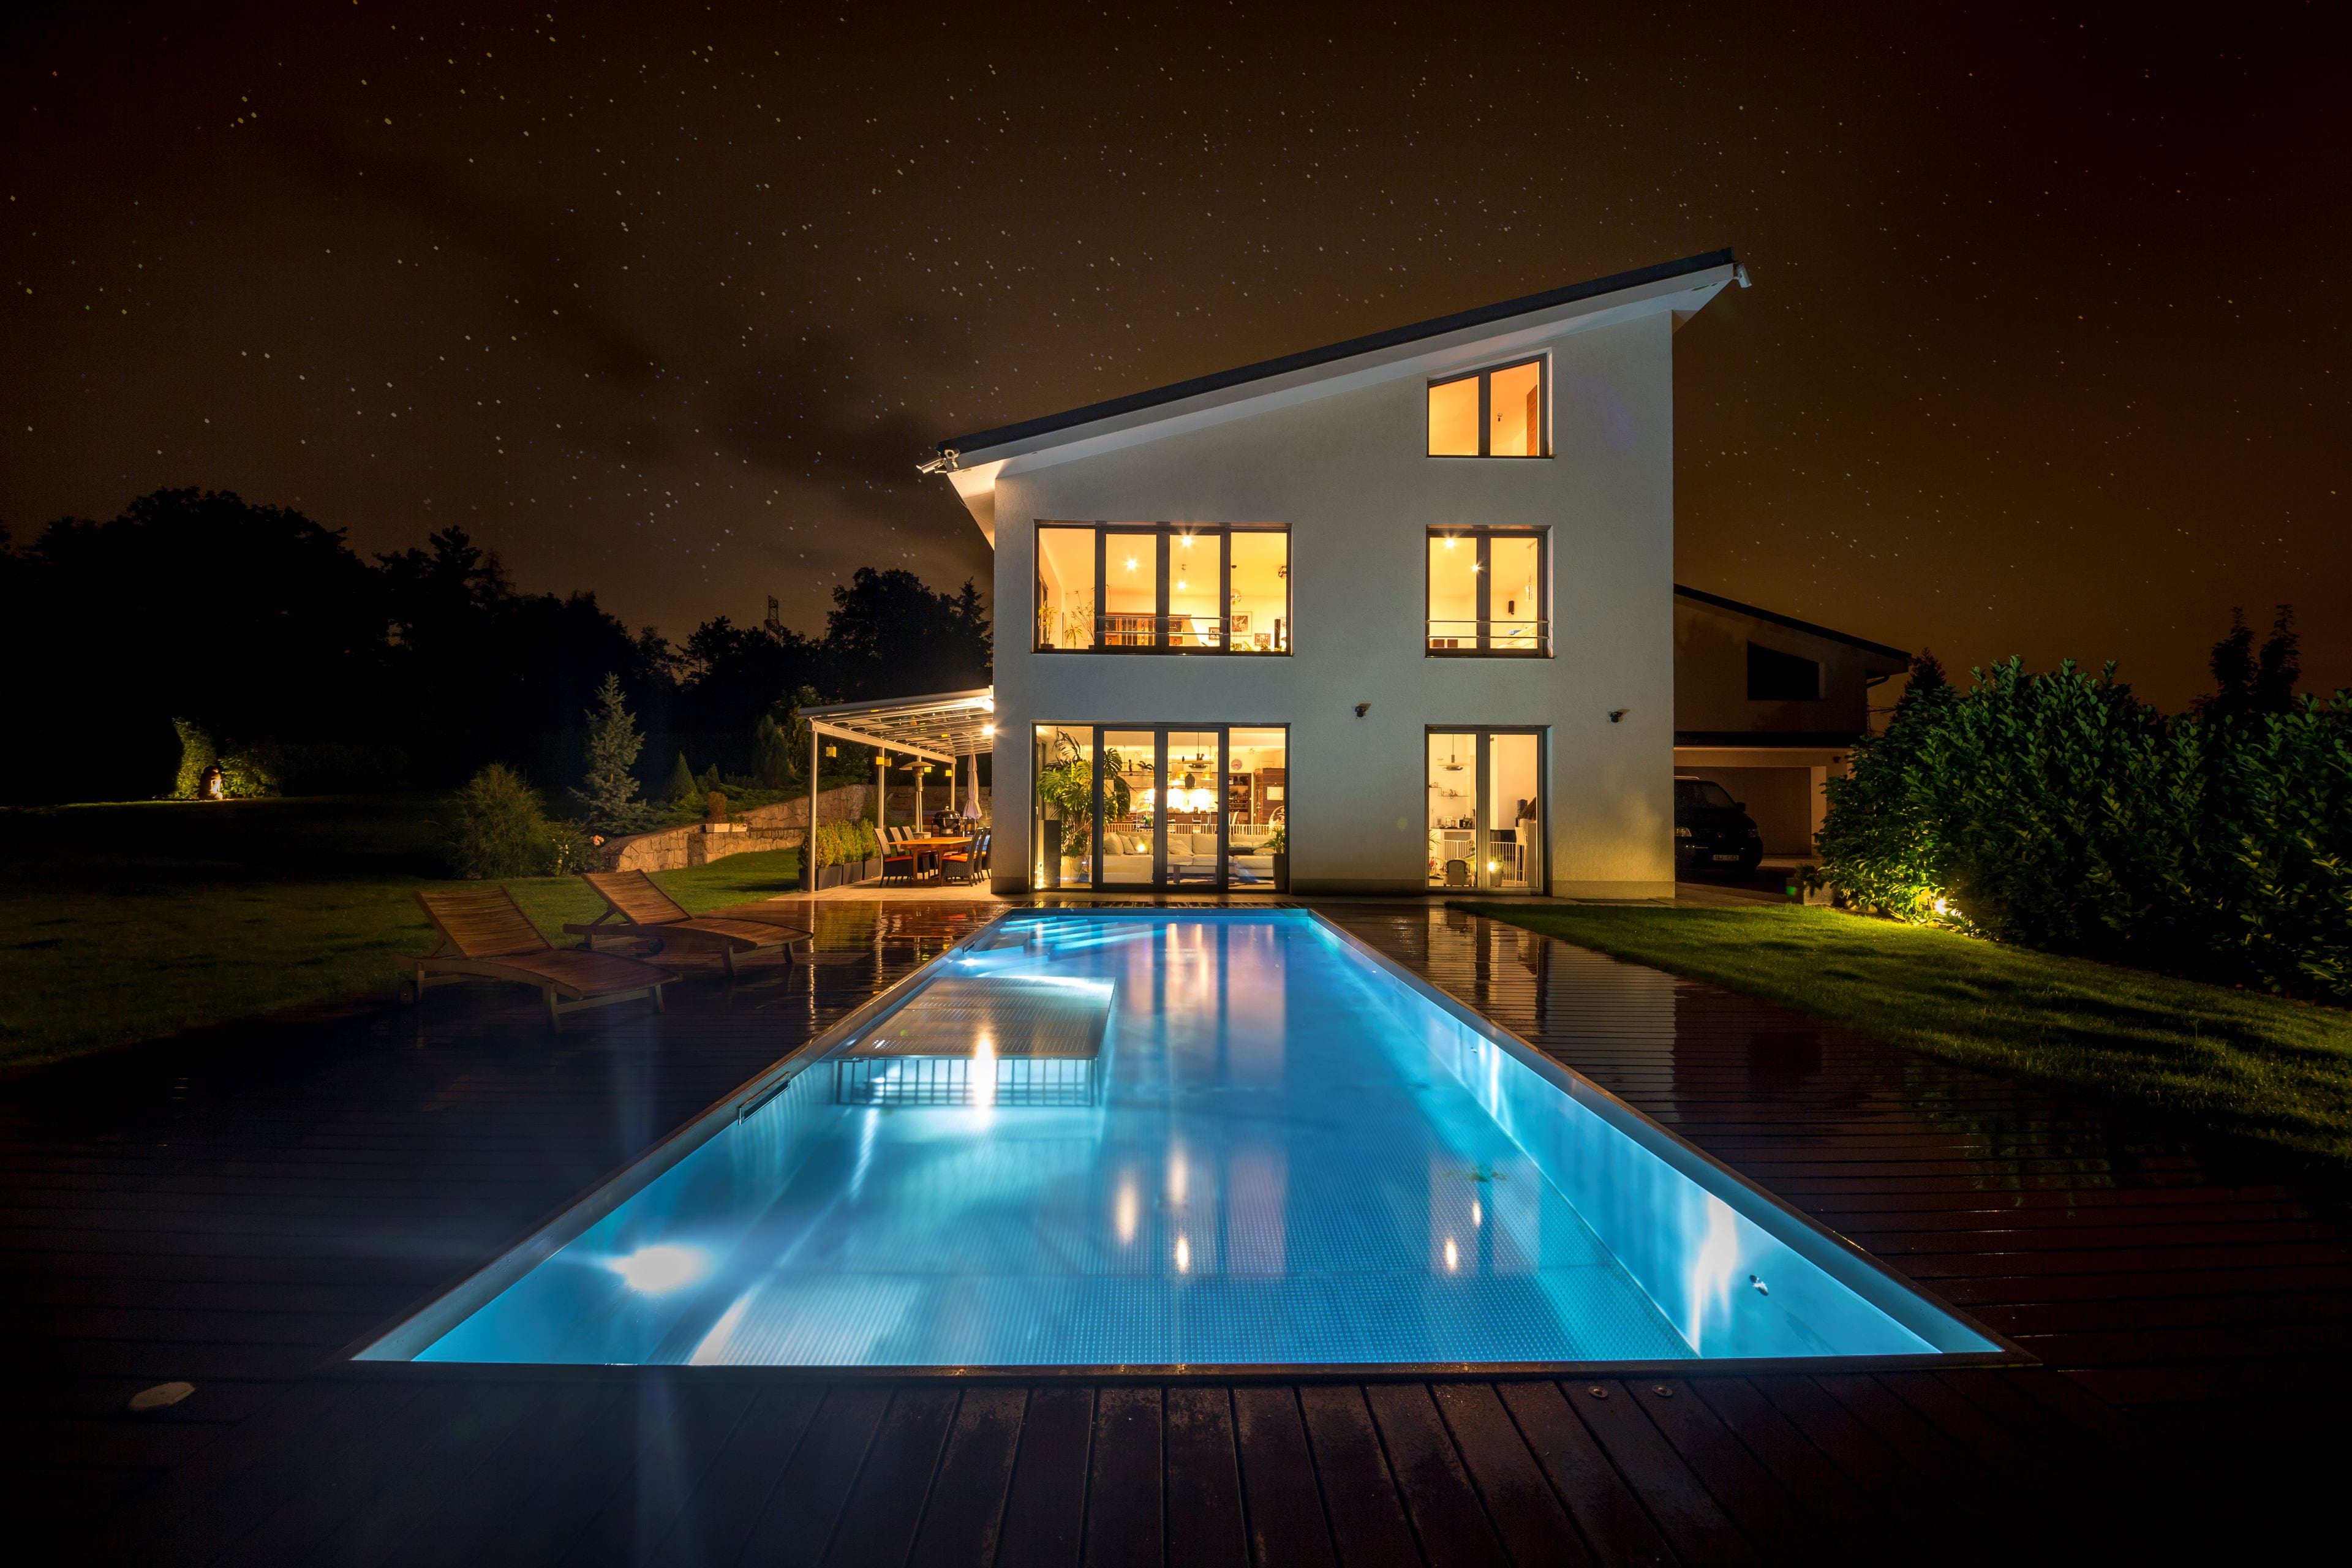 Pool Story: Realization of the IMAGINOX Stainless-Steel Pool! | IMAGINOX GROUP